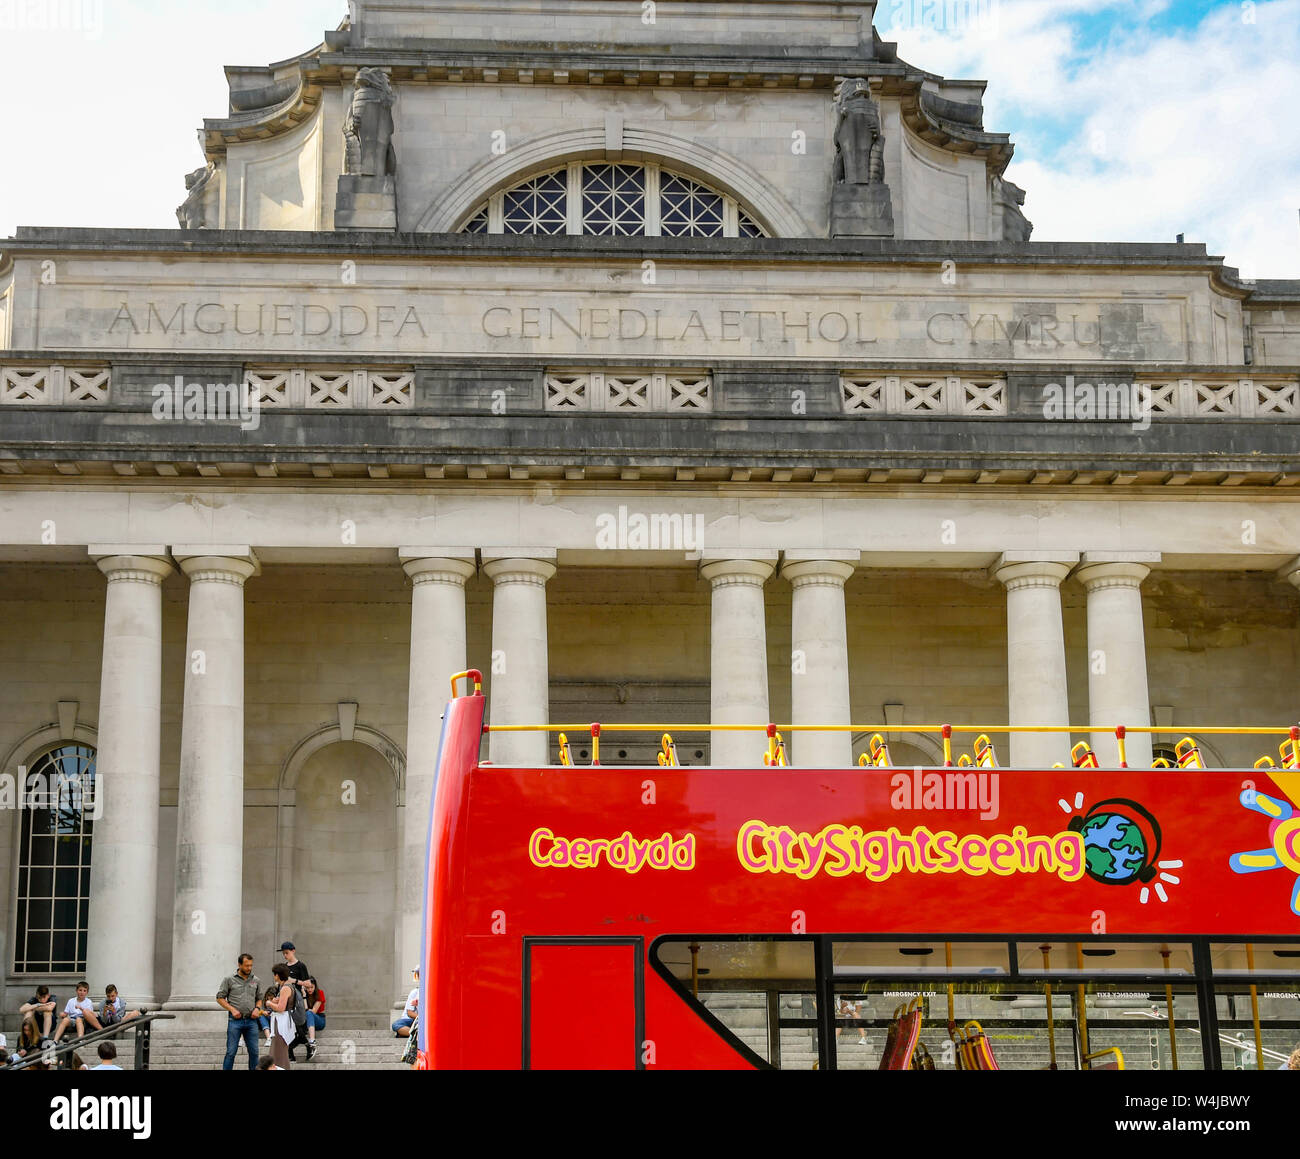 CARDIFF, WALES - JULY 2019: Sightseeing tour bus parked outside the National Museum of Wales n Cardiff city centre. Stock Photo